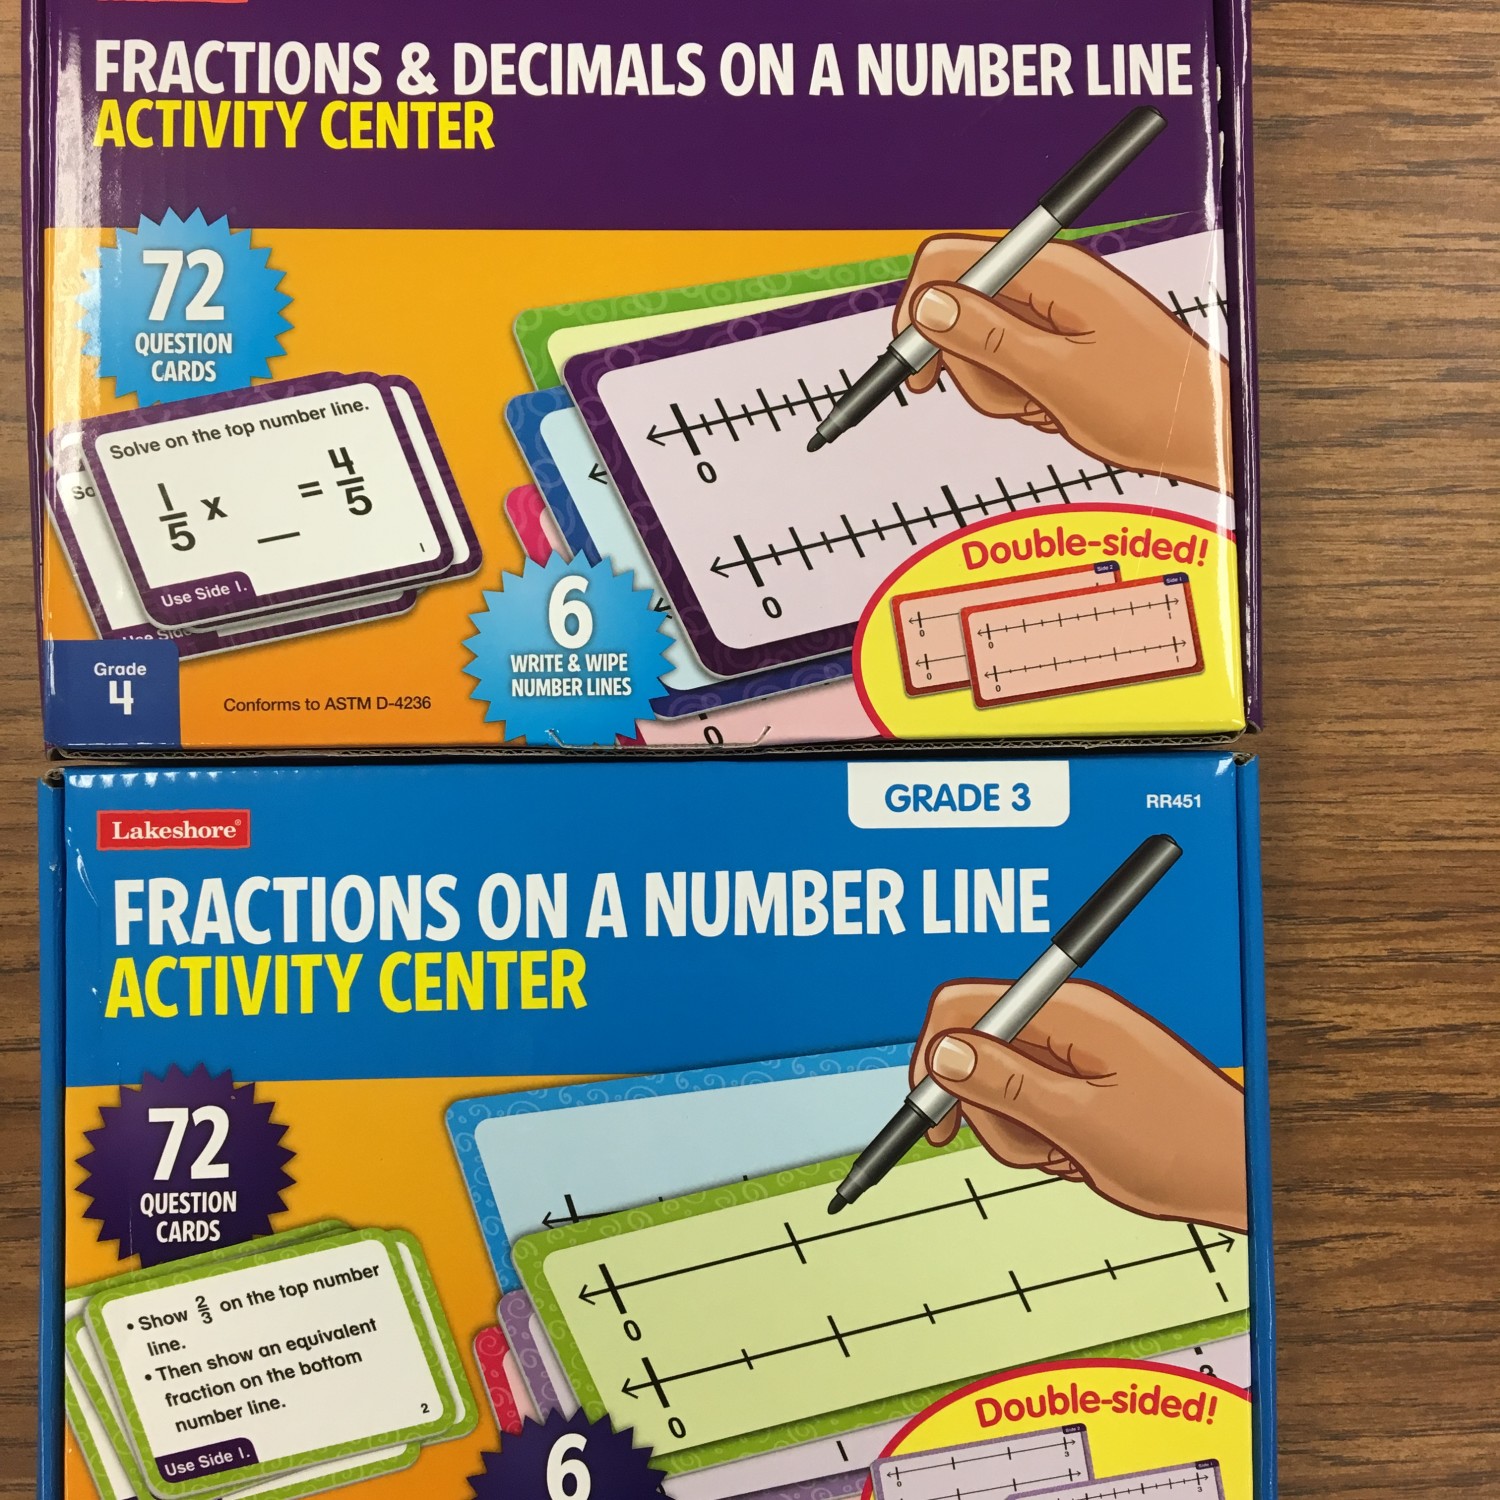 Fractions and decimals on a number line activity center